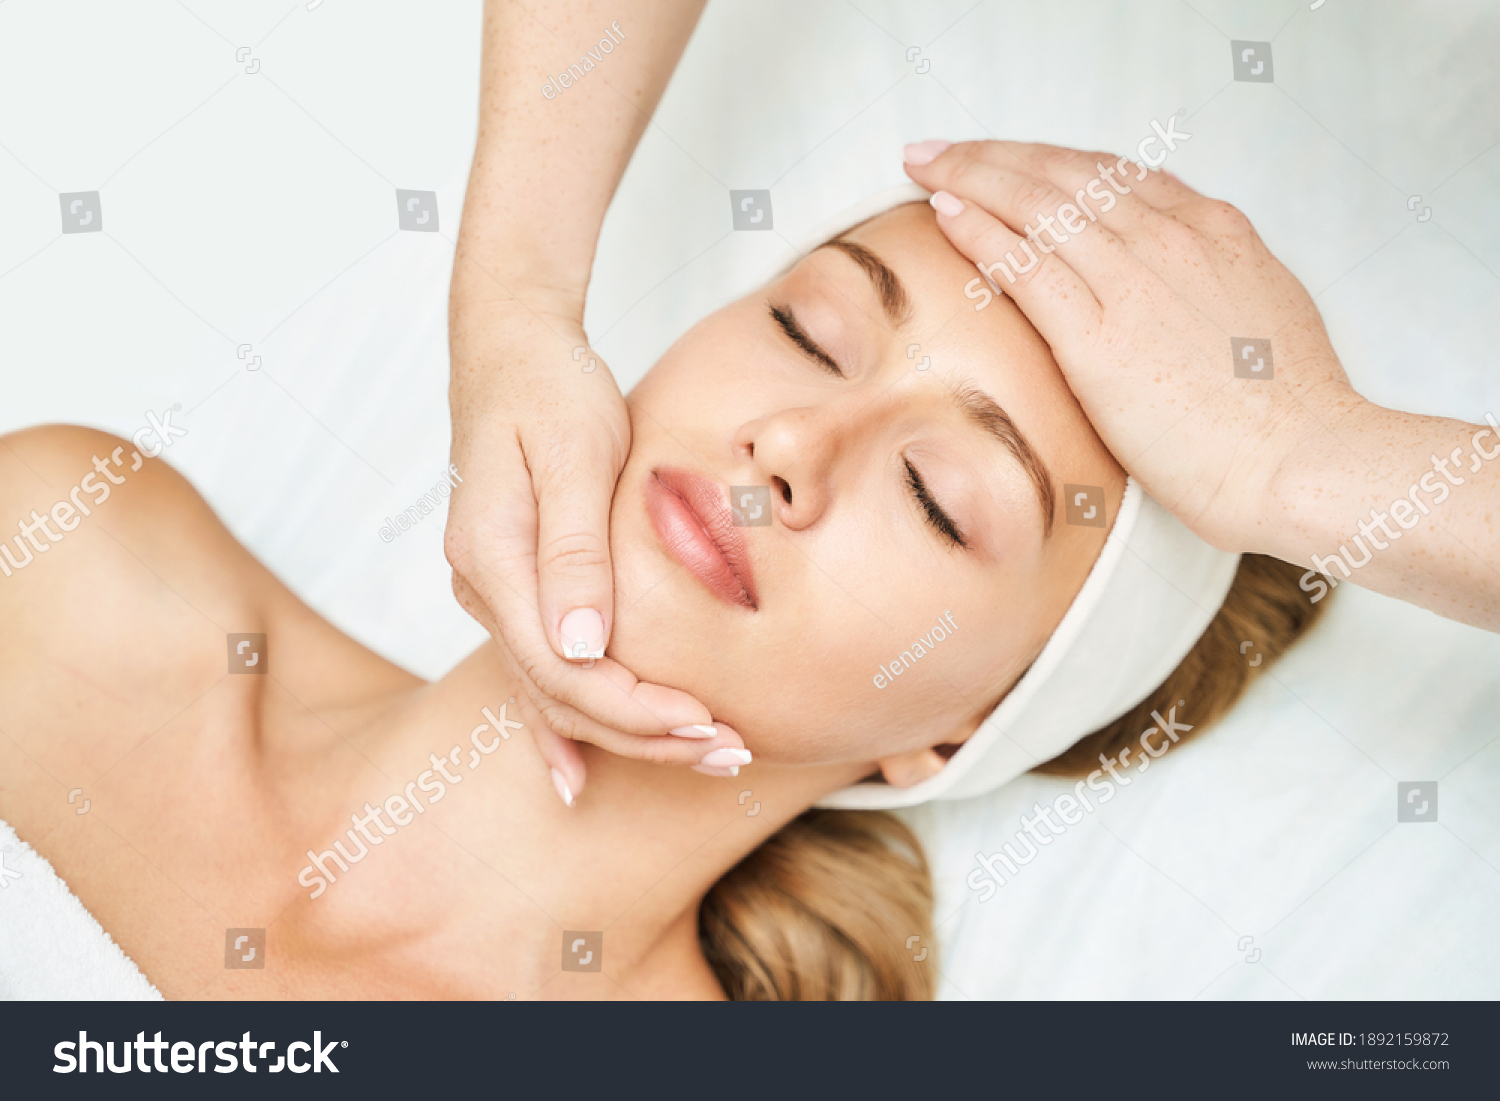 Face massage at spa salon. Doctor hands. Pretty female patient. Beauty treatment. Healthy skin procedure. Young woman head. Light background. Scrub rejuvenation. Facial dermatology mask. Detox therapy #1892159872